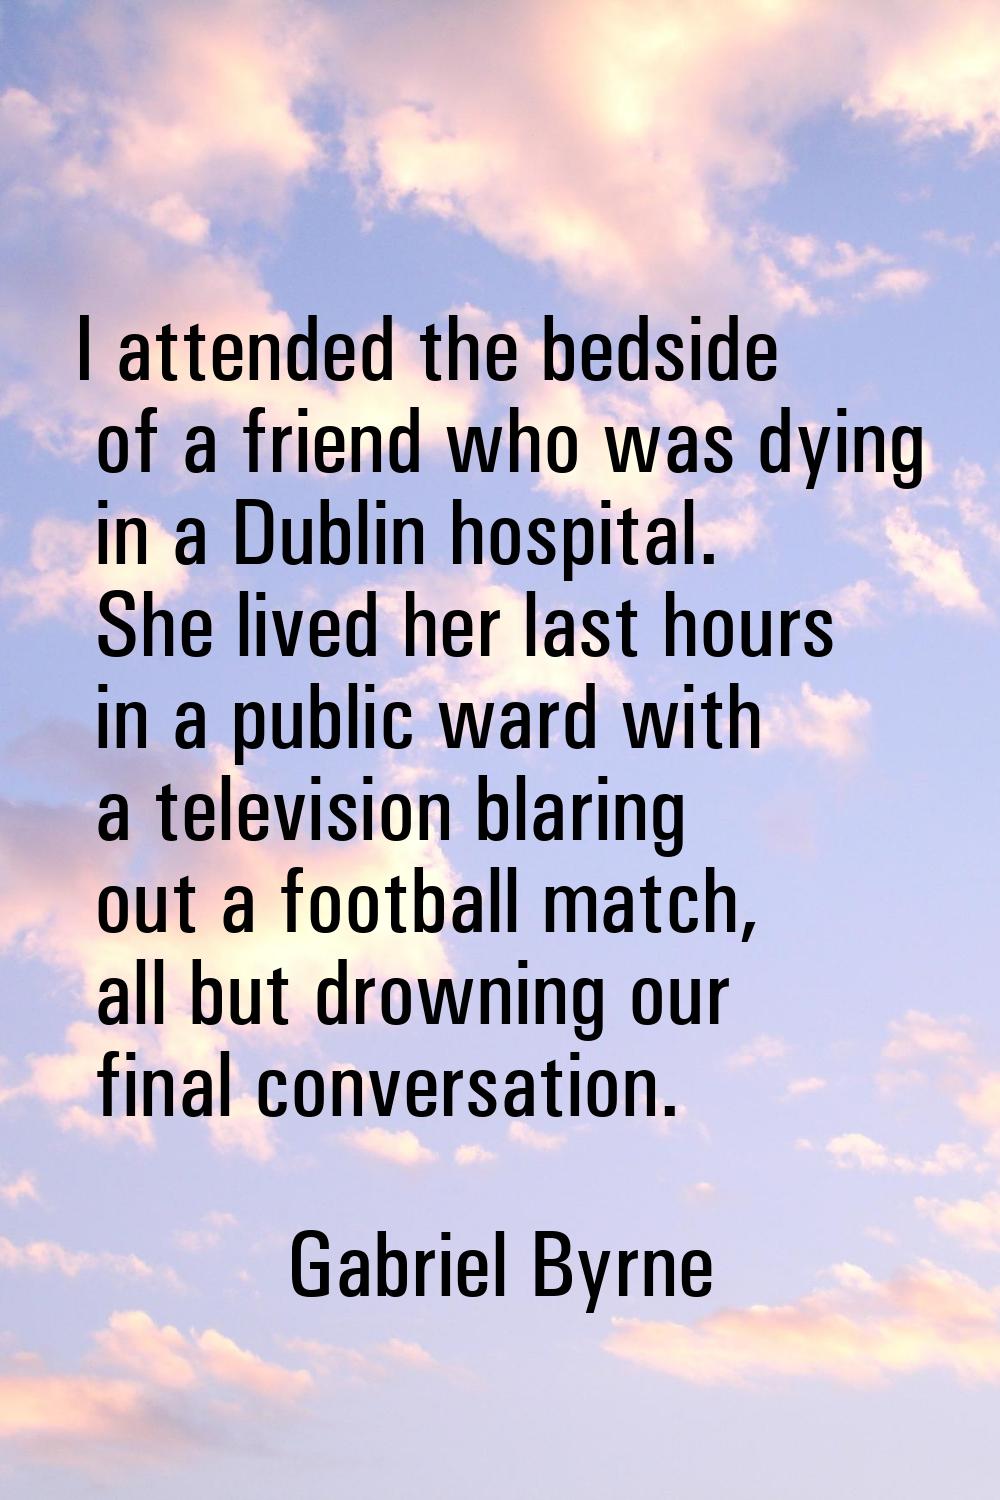 I attended the bedside of a friend who was dying in a Dublin hospital. She lived her last hours in 